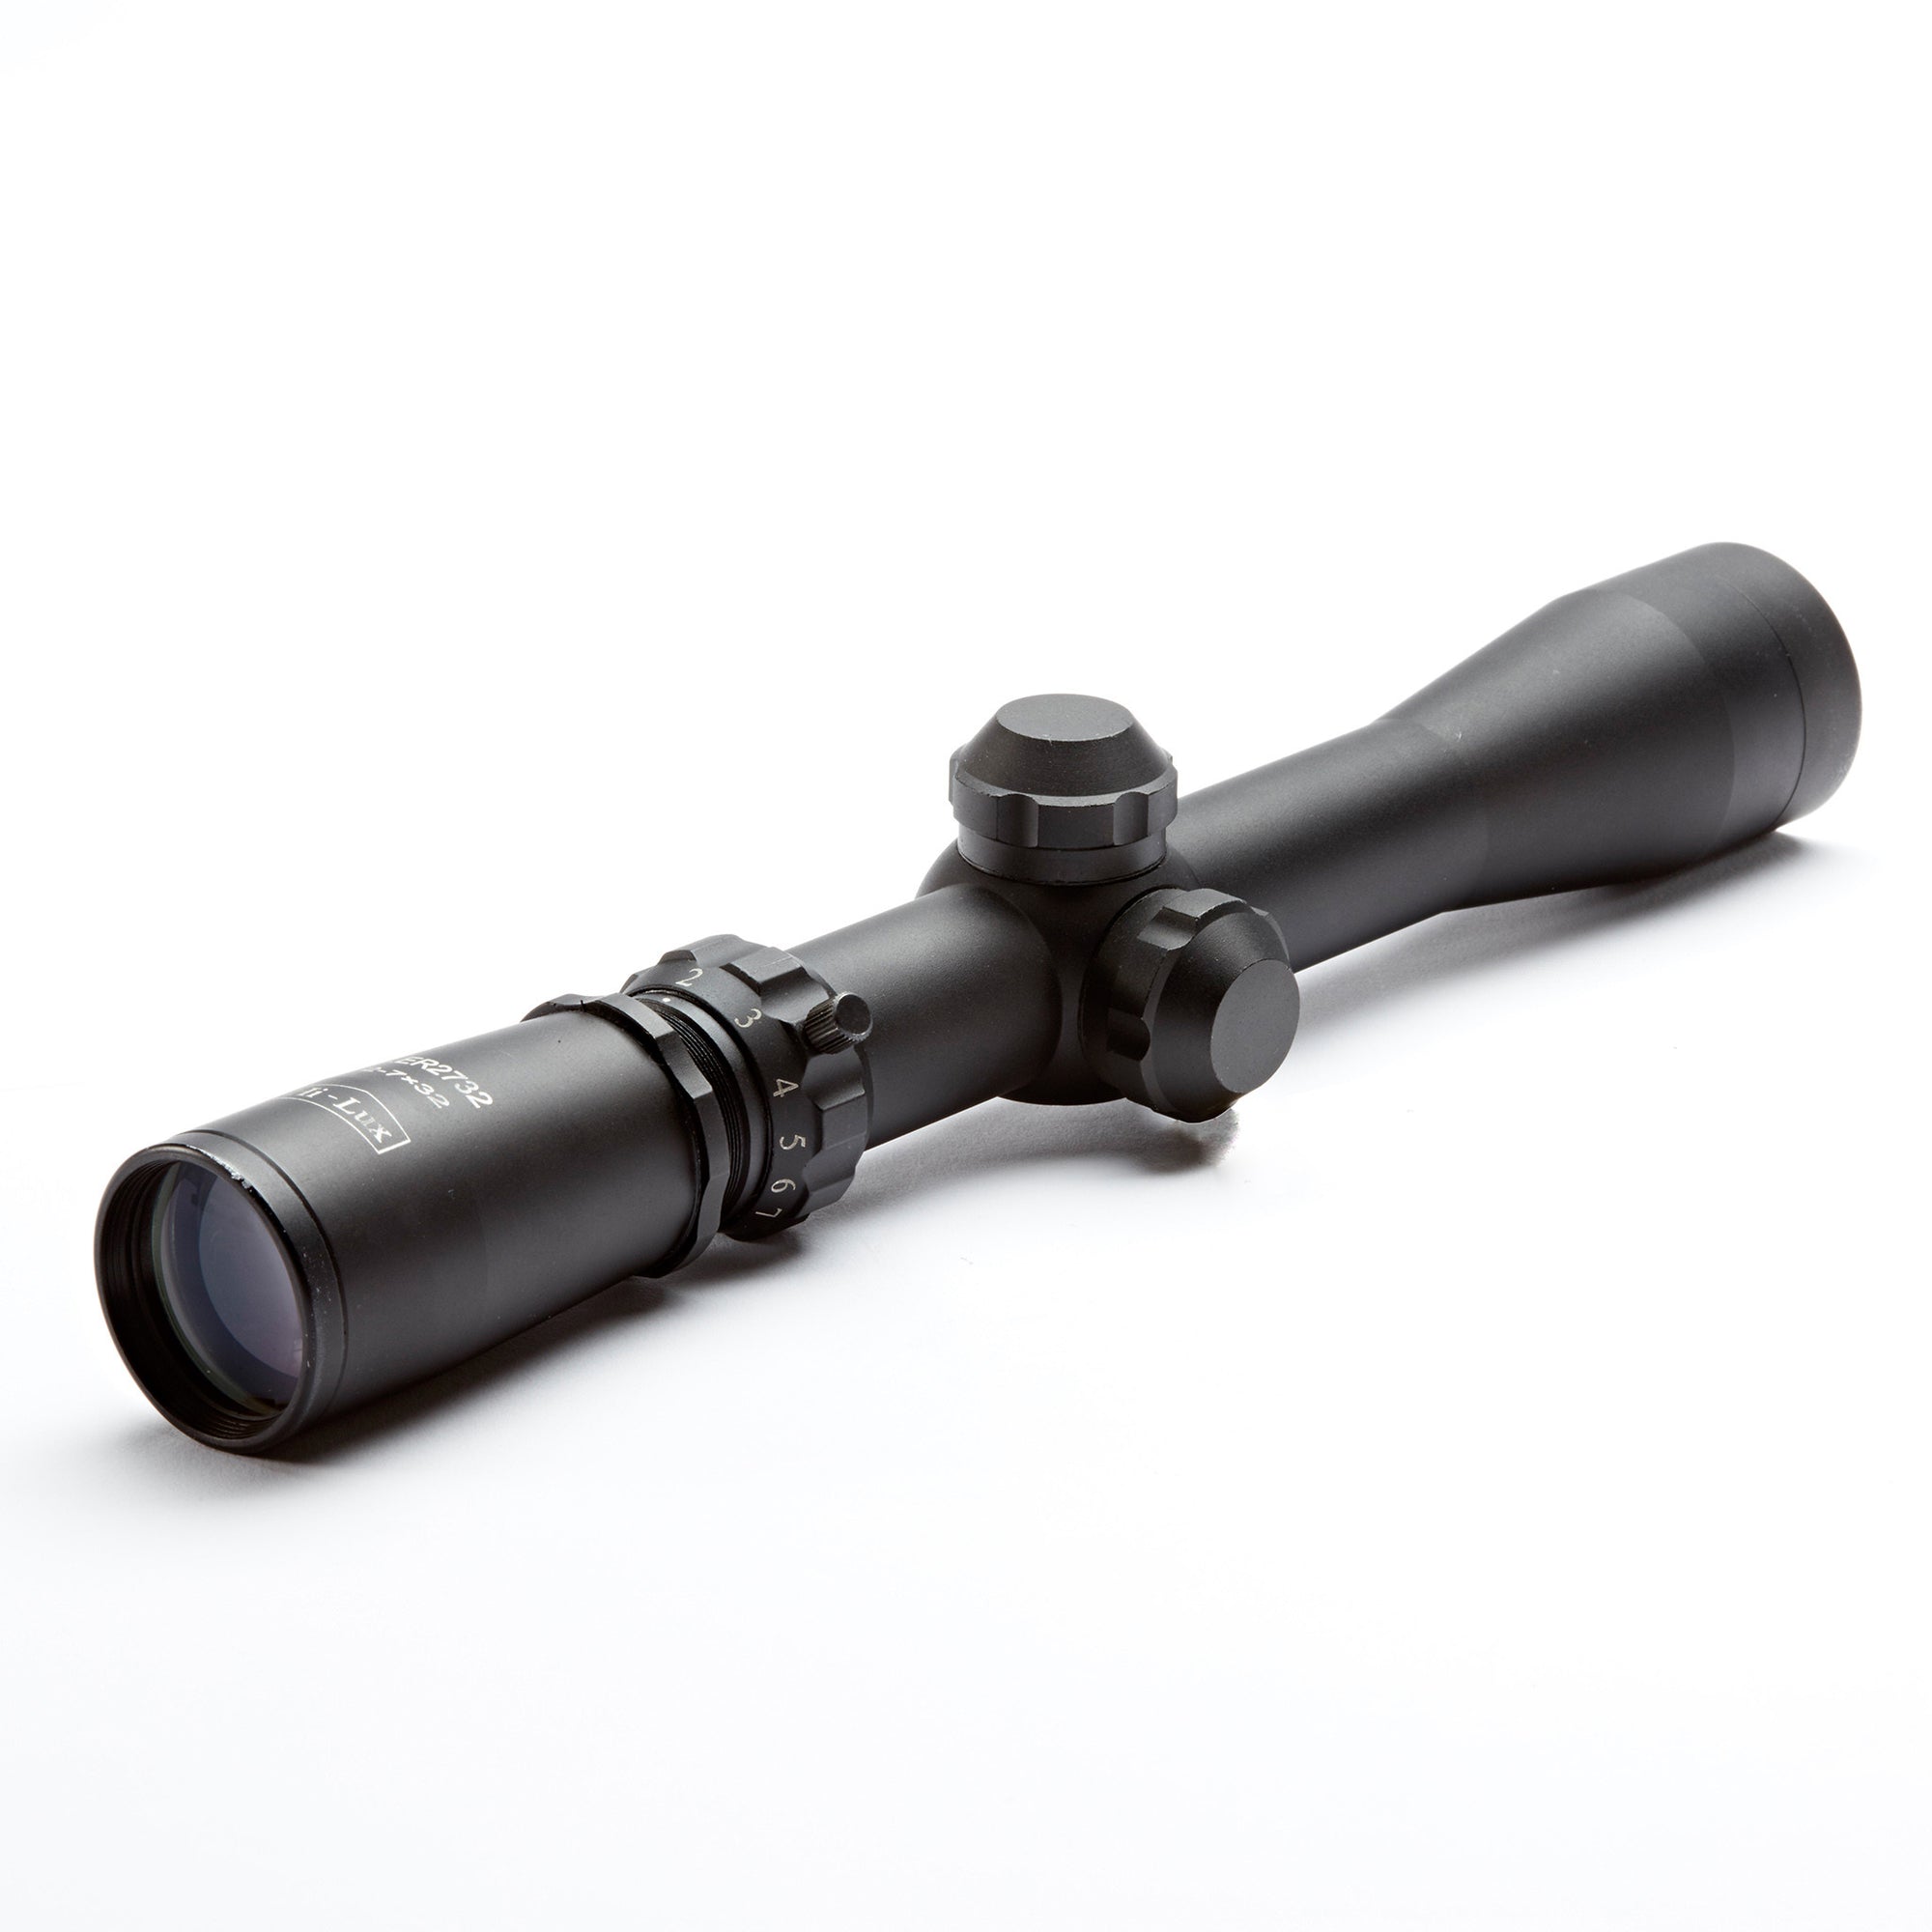 The Hi-Lux Optics LER Scout - Designed Today\'s for Specifically Scope